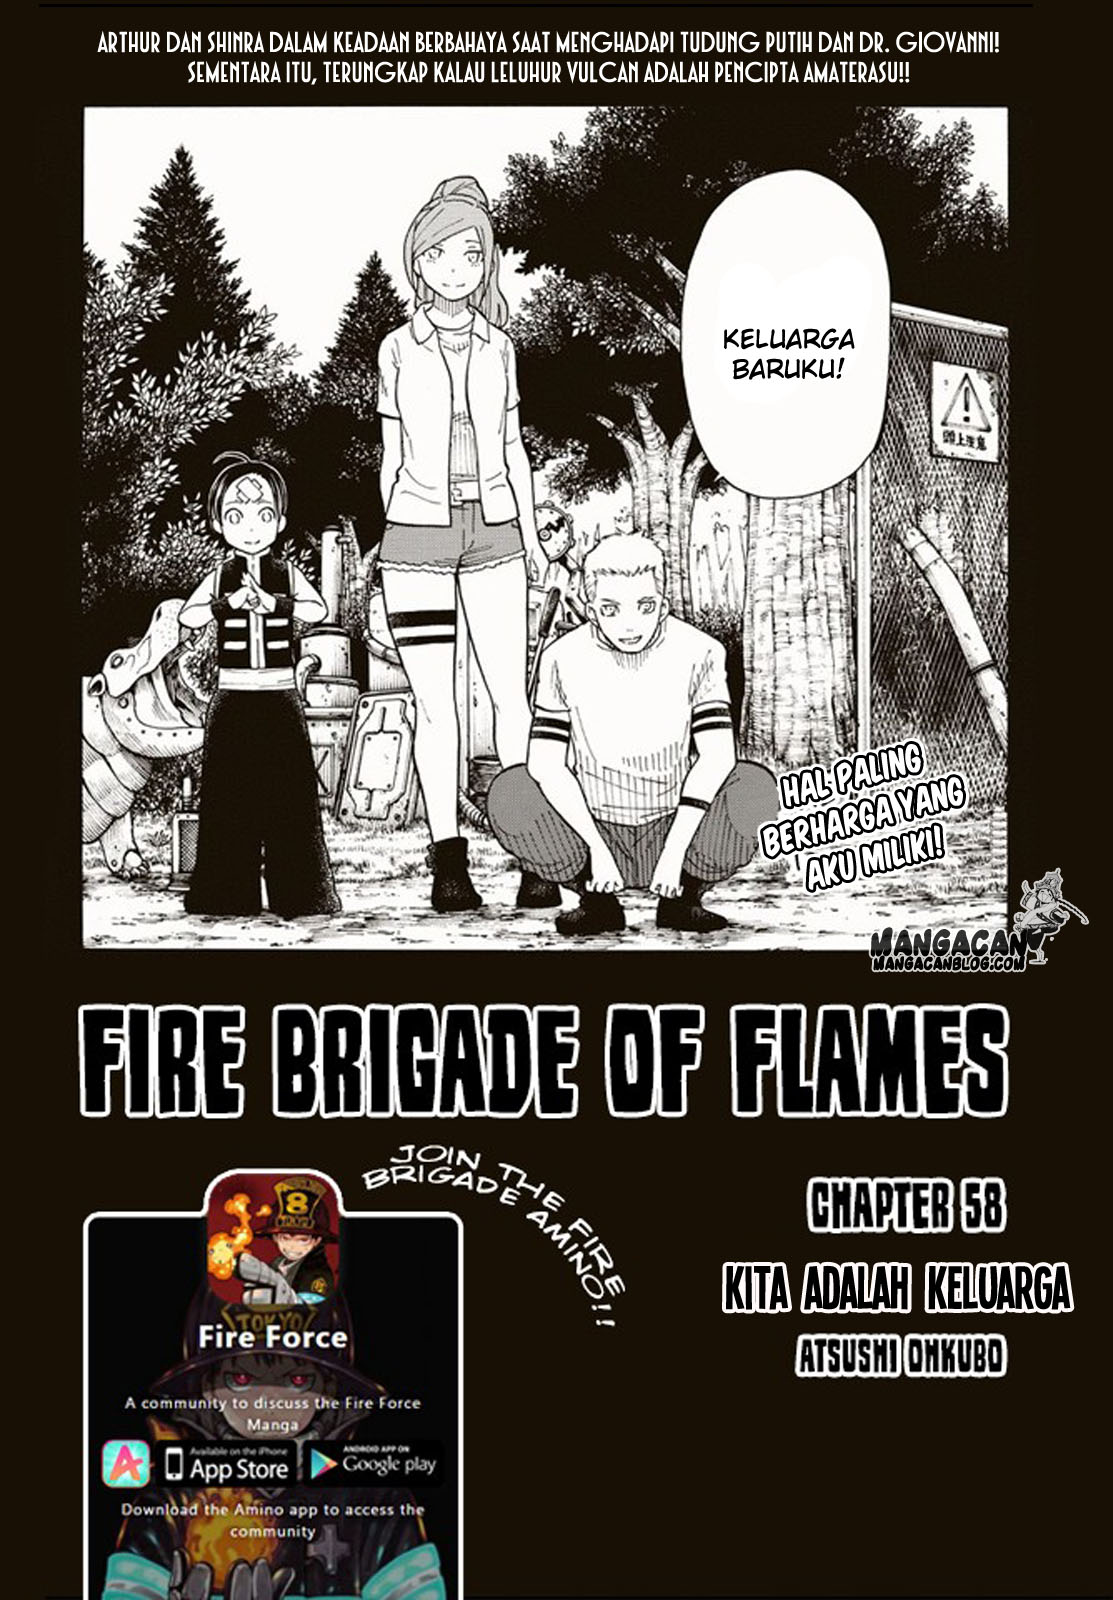 Fire Brigade of Flames Chapter 58